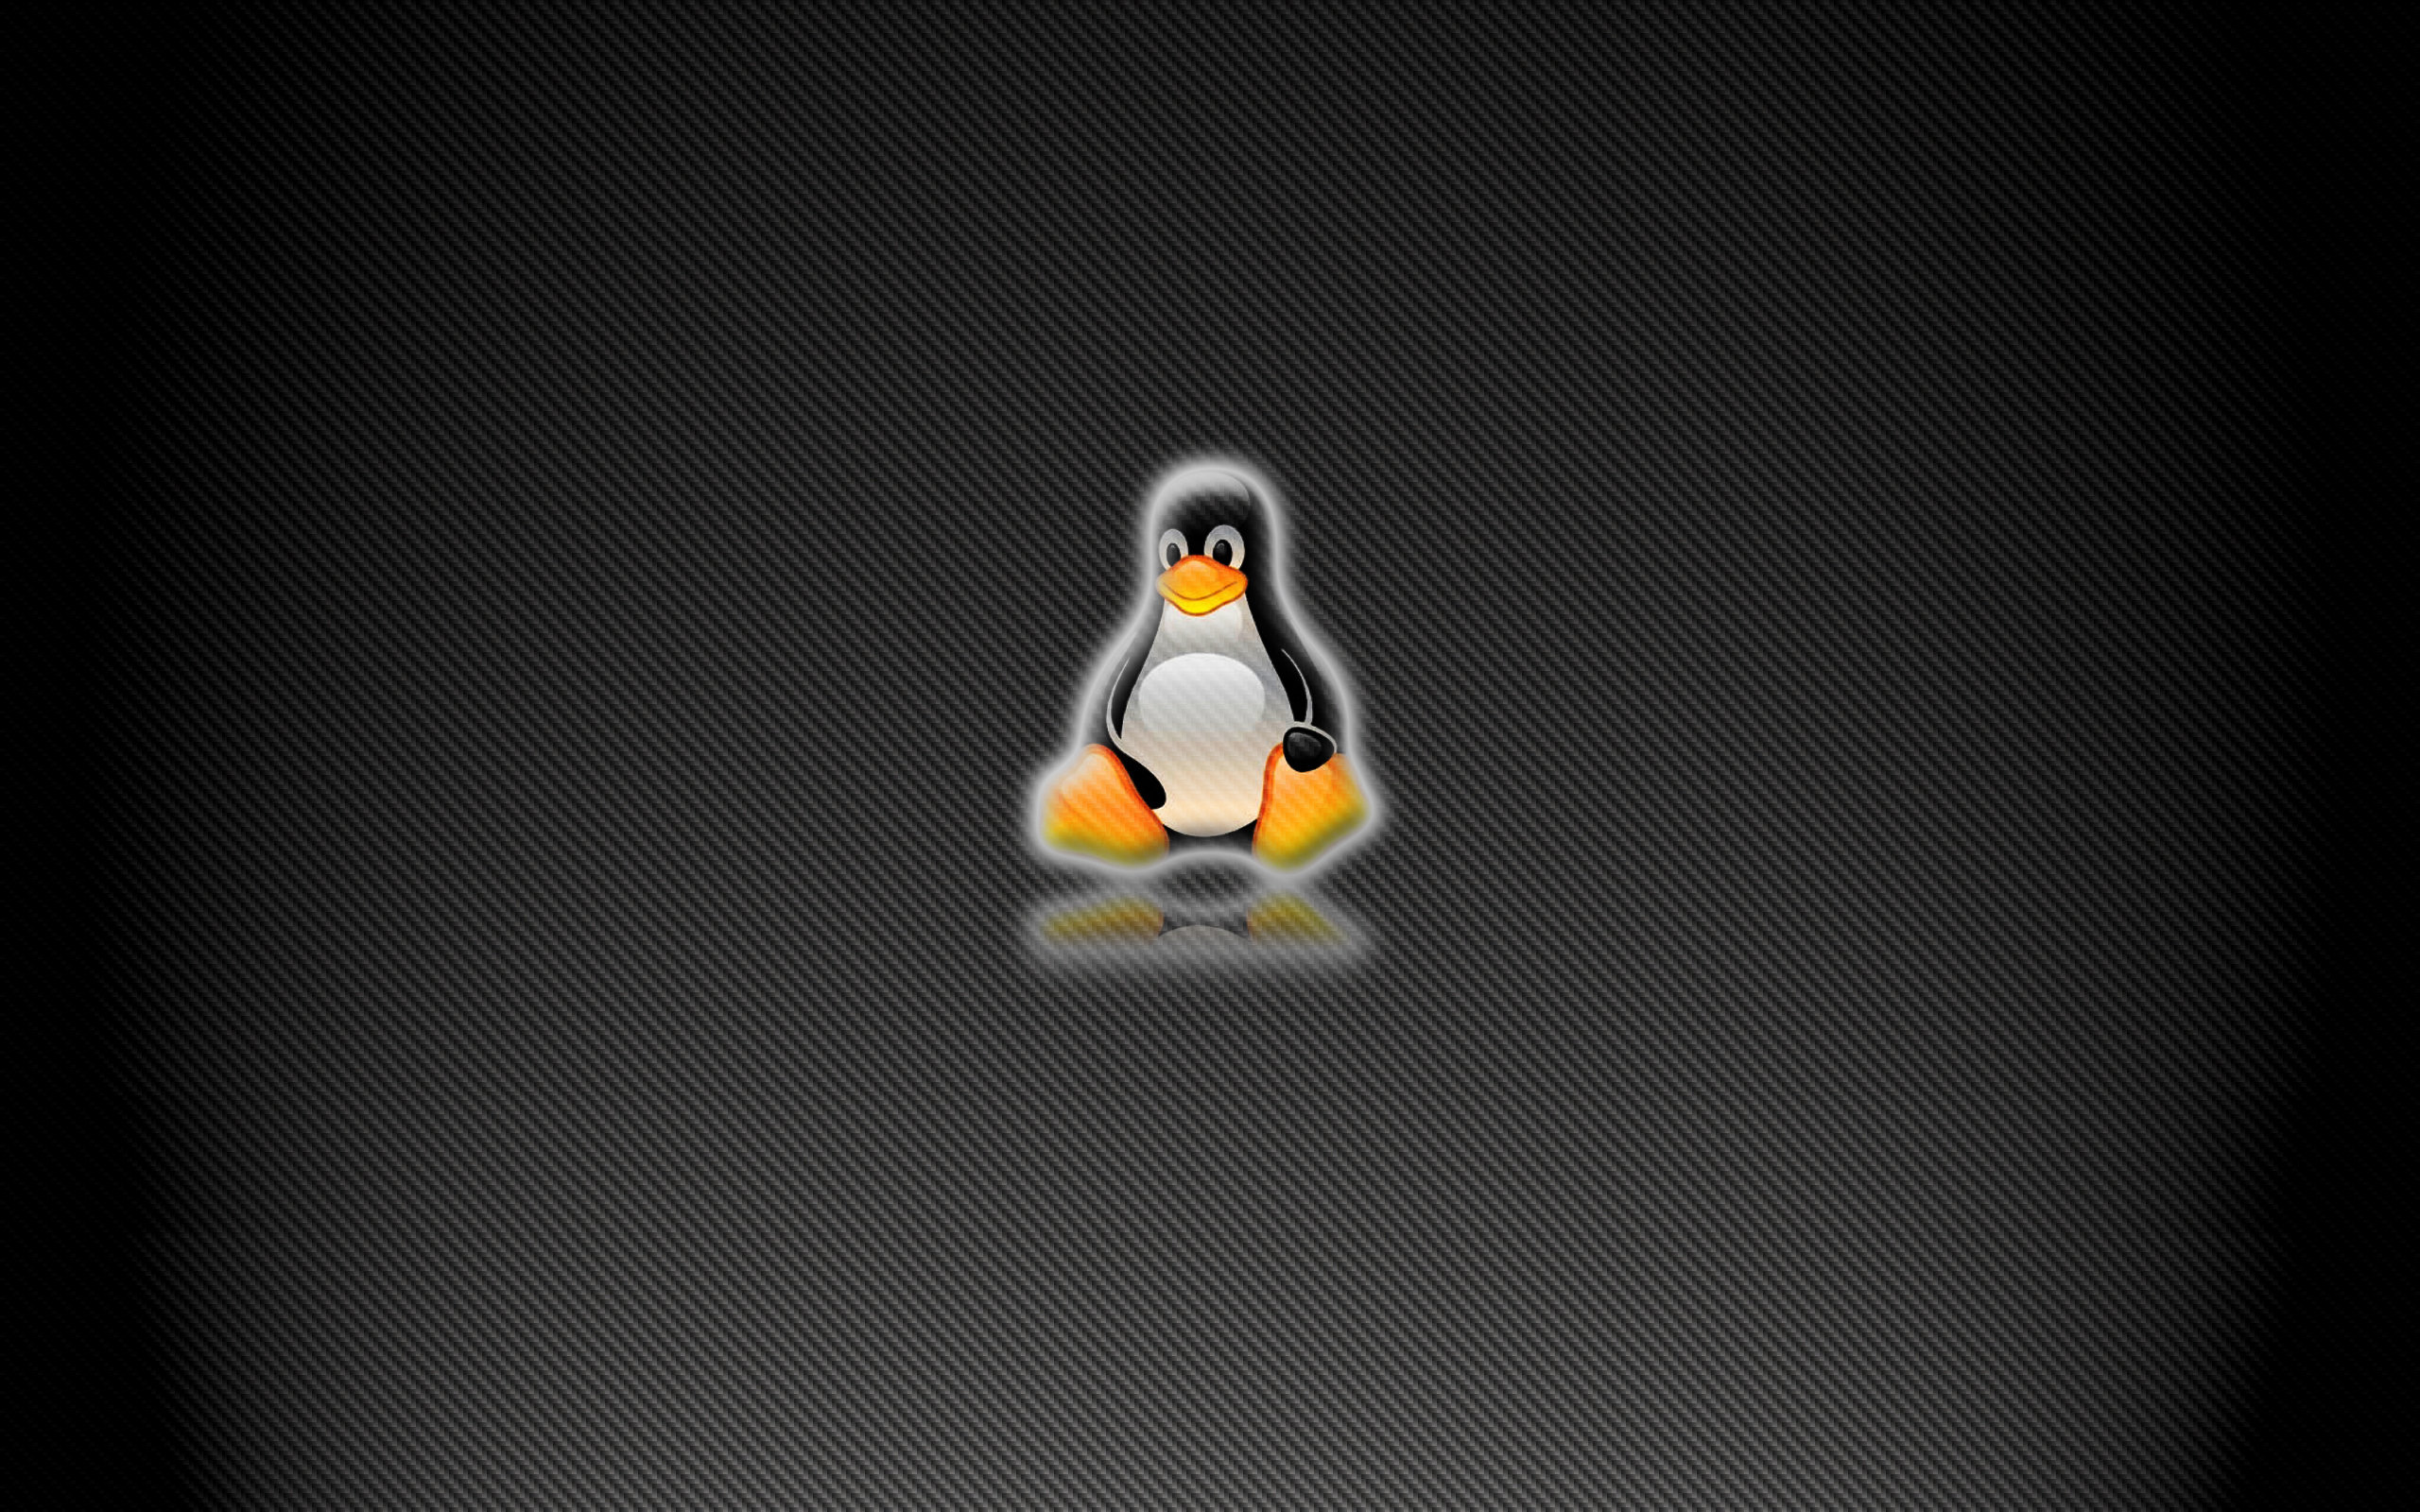 Awesome Linux Wallpaper